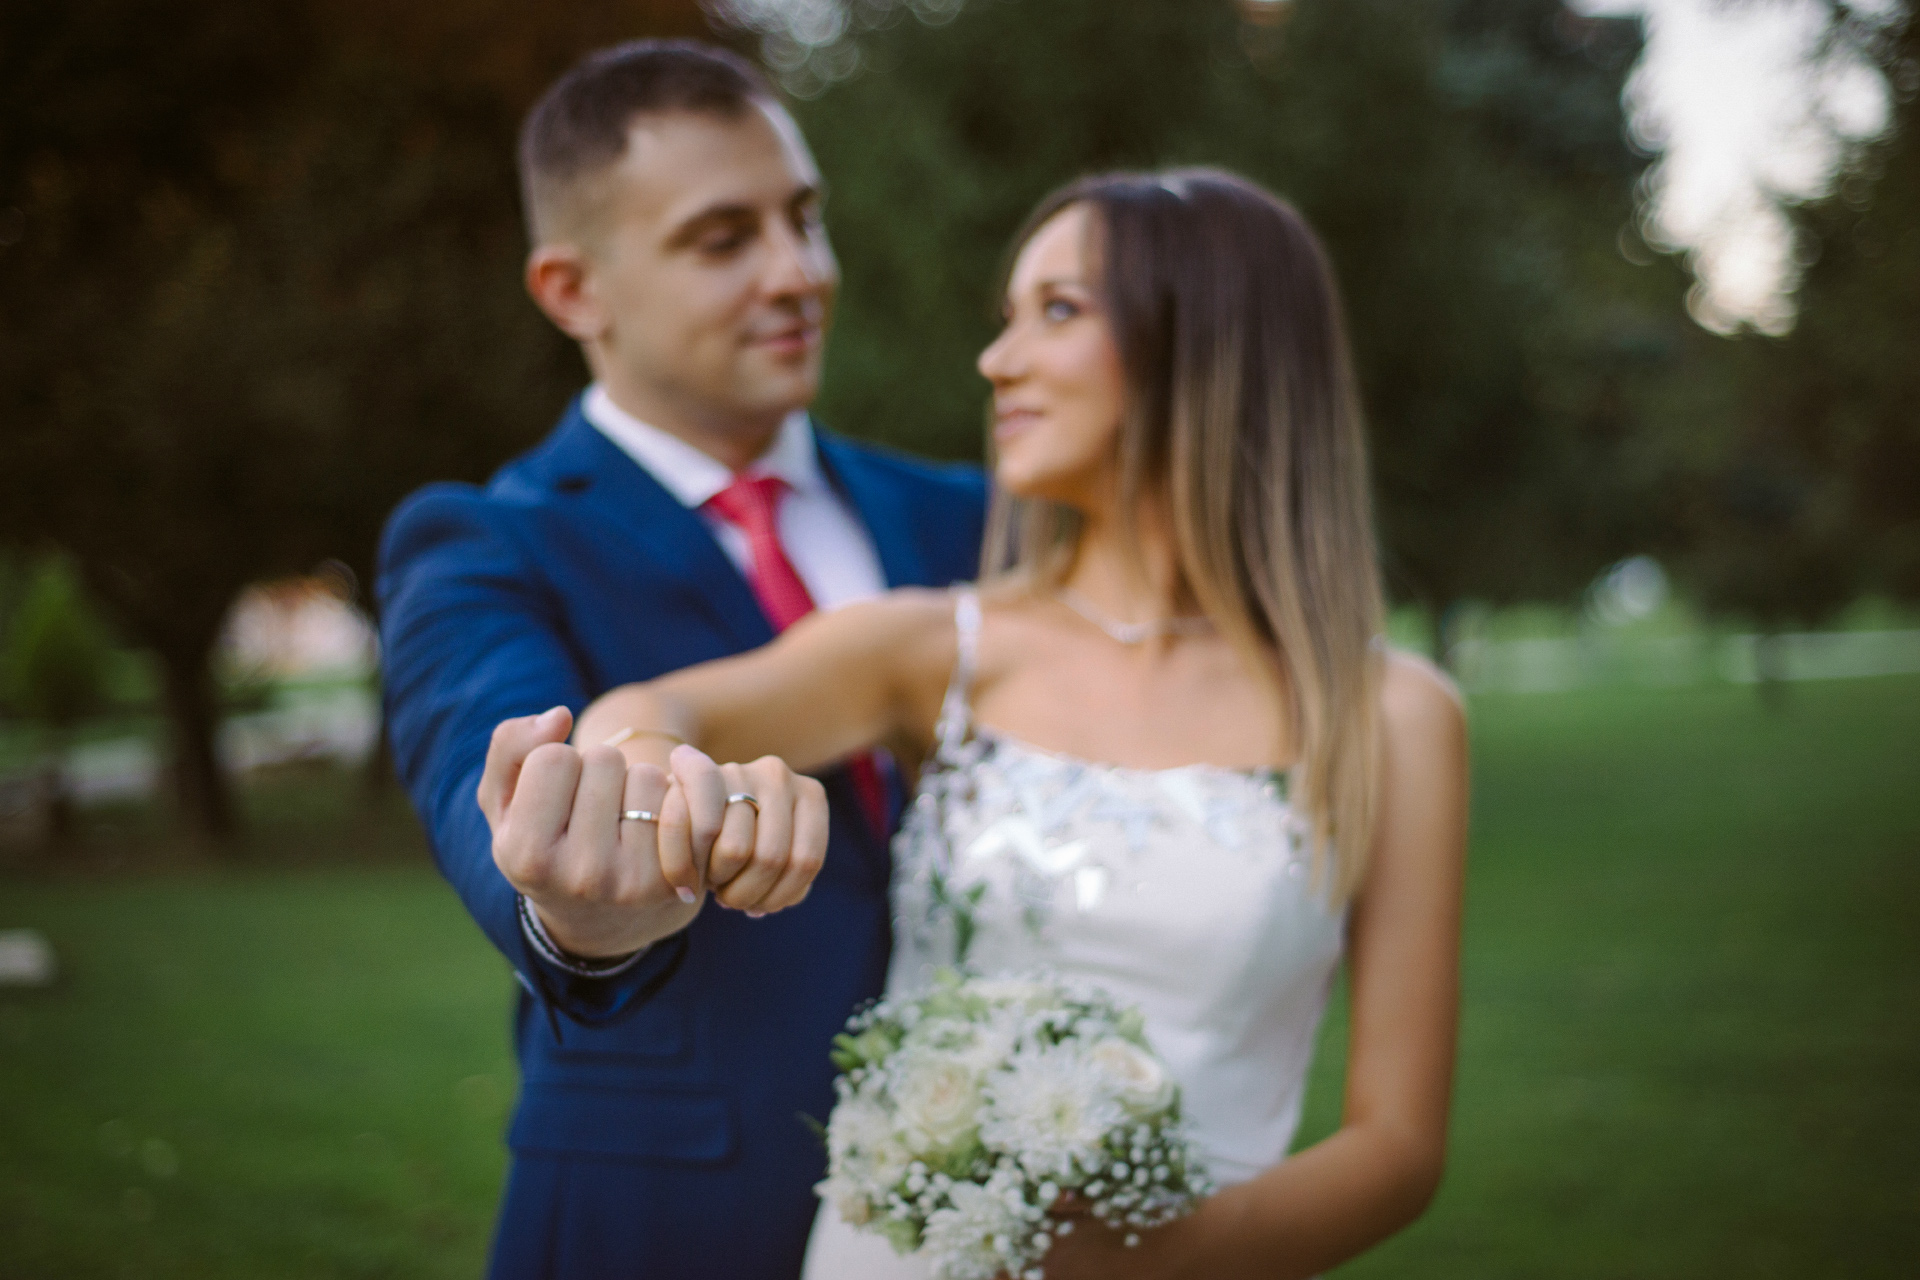 Exchange wedding rings with your fiancee